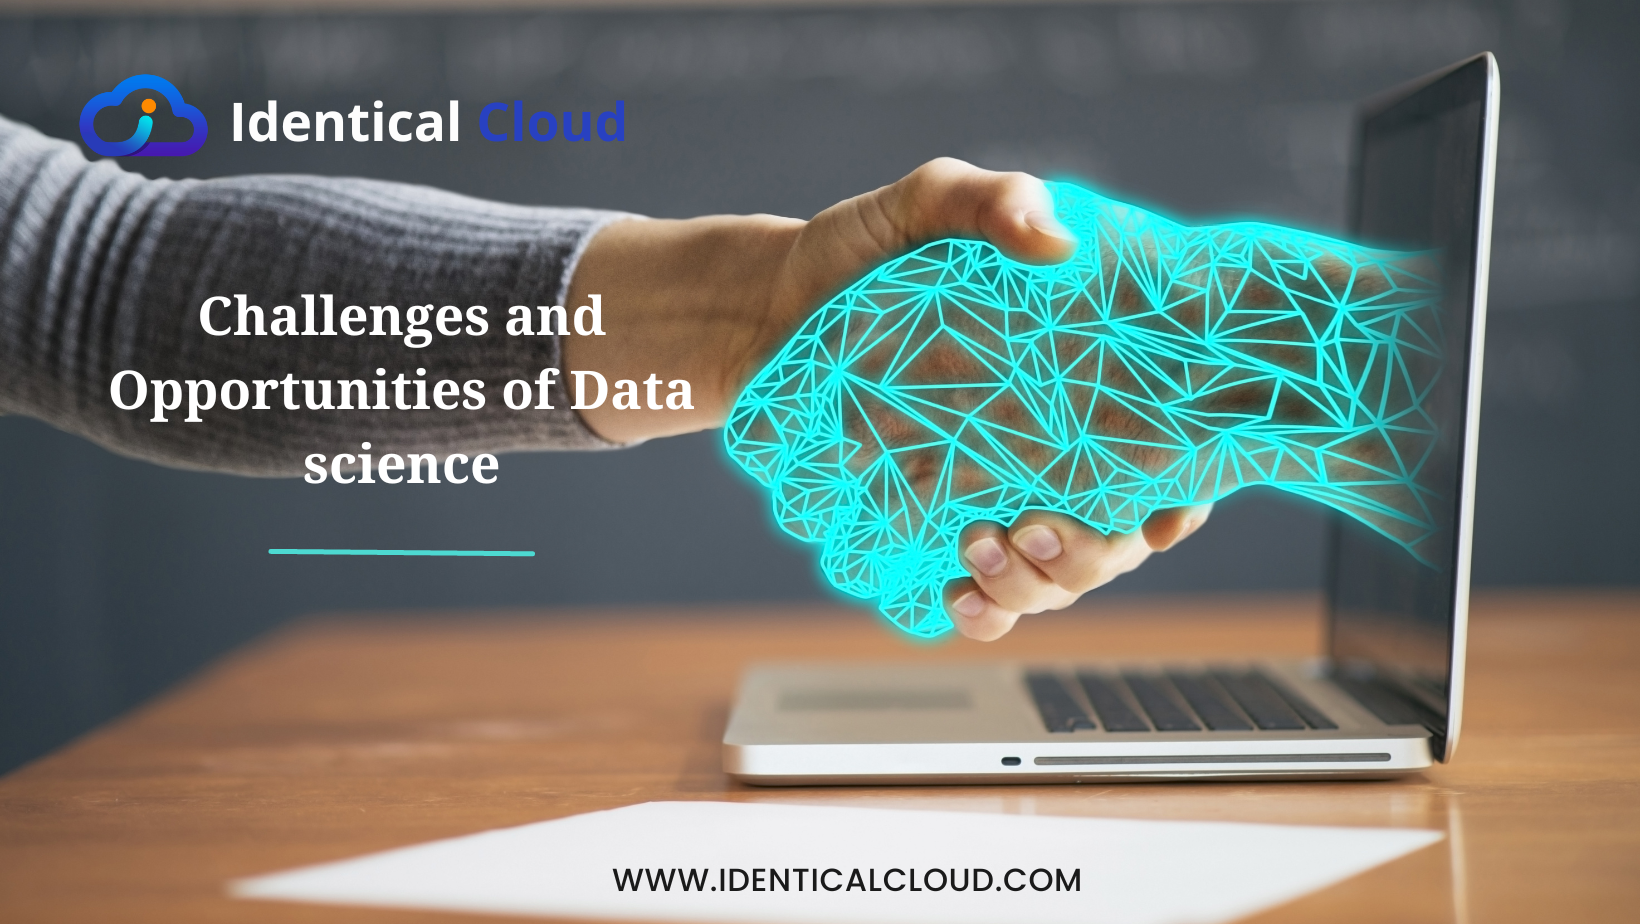 Challenges and Opportunities of Data science - identicalcloud.com